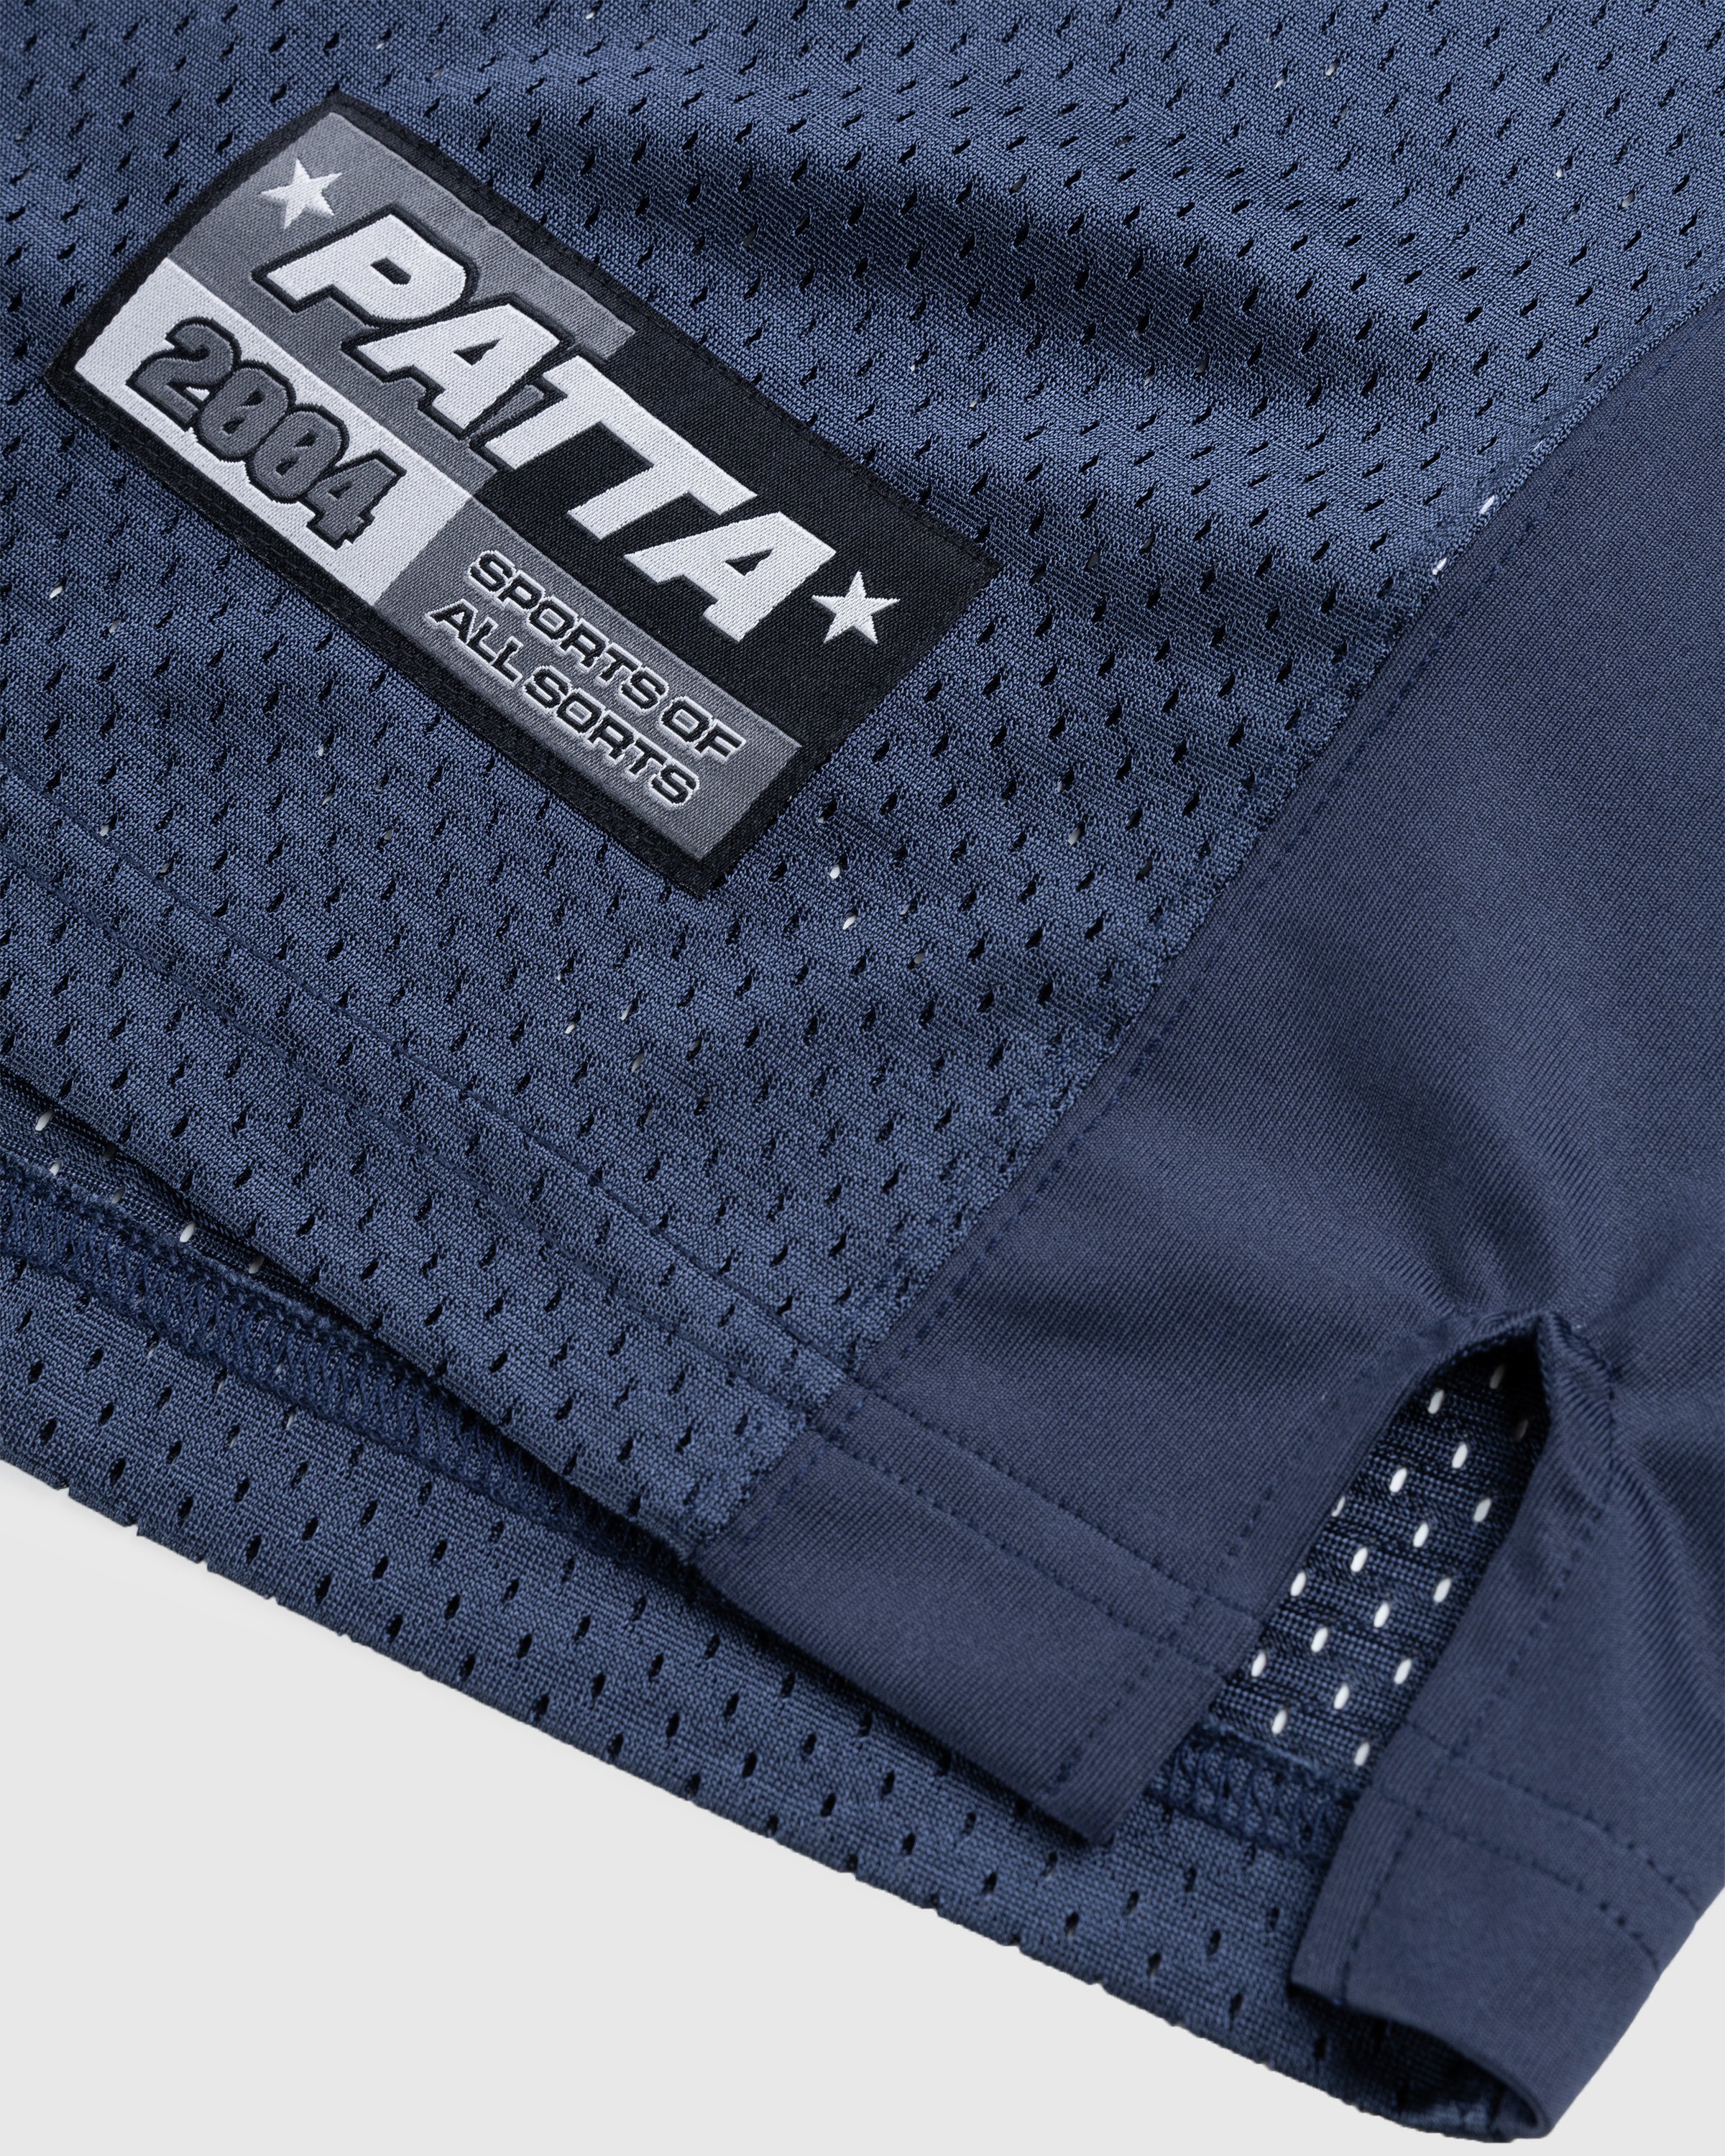 Patta - Respect Football Jersey Blue Nights/Pearl Blue - Clothing - Blue - Image 6